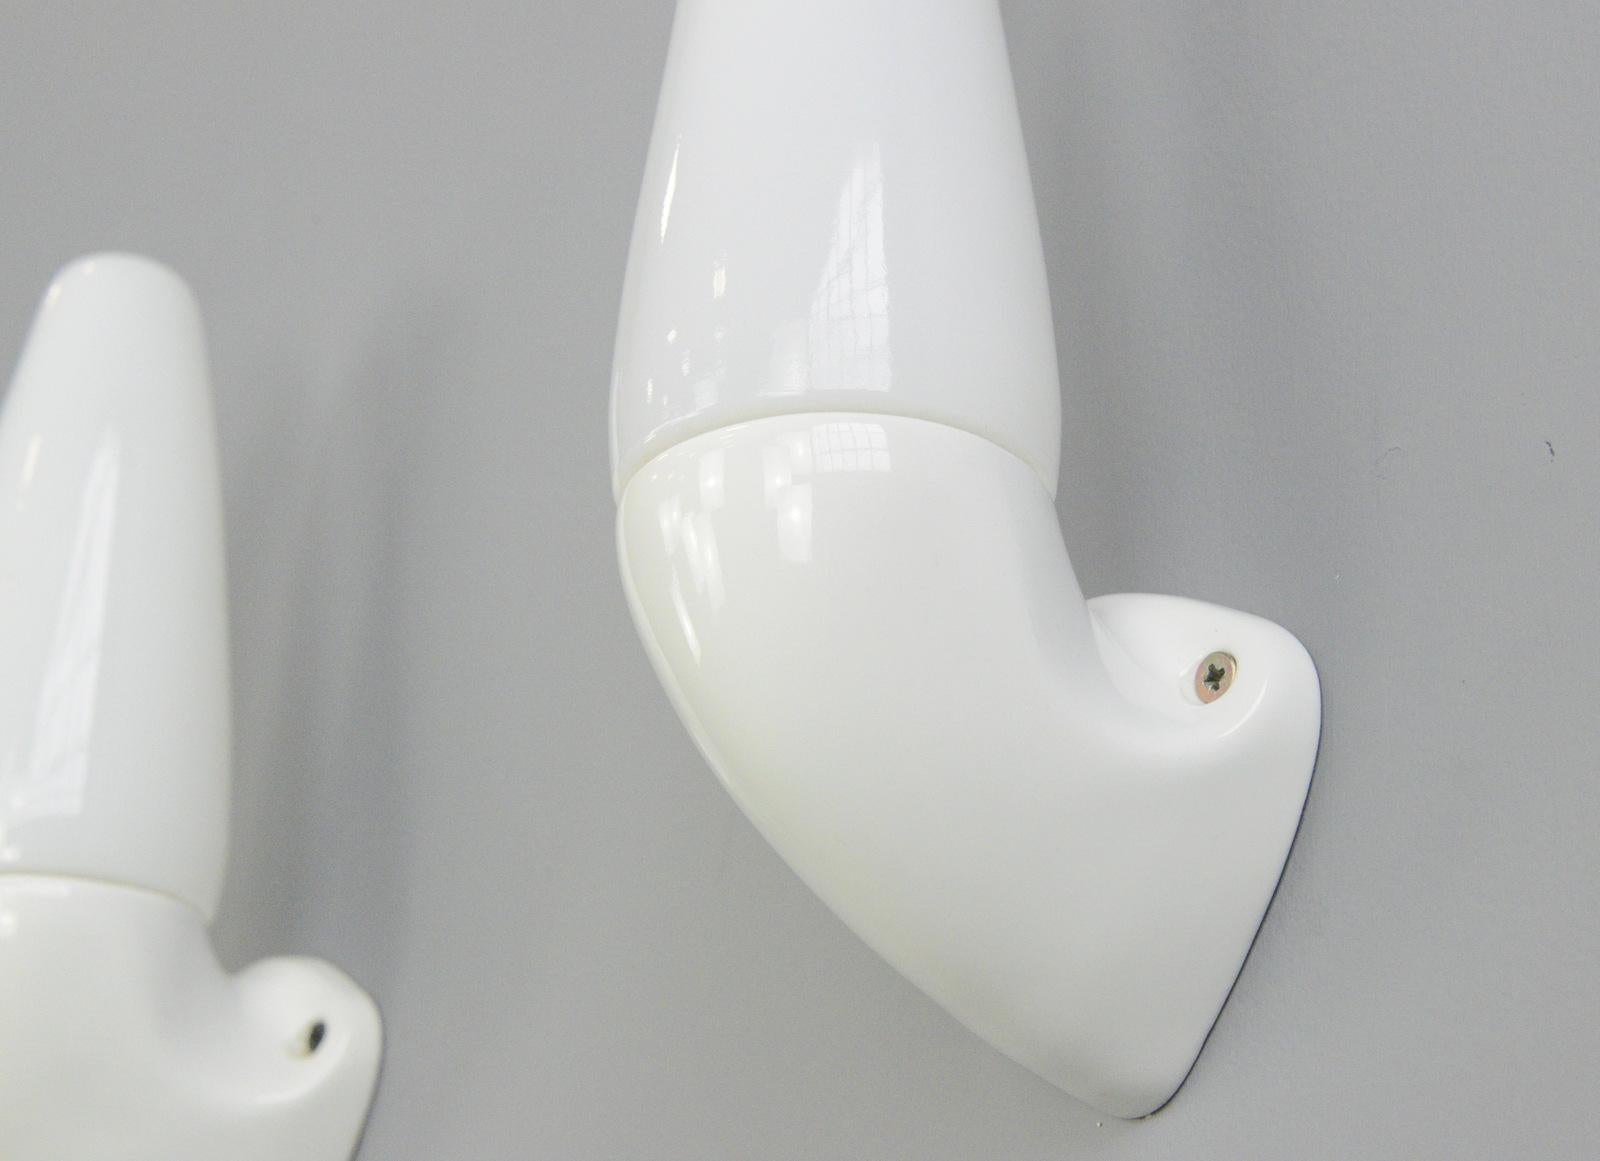 Porcelain bathroom lights by Sigvard Bernadotte for Ifo, circa 1950s

- Price is per pair 
- Vitreous white porcelain wall mounts
- Screw off opaline shades
- Takes E27 fitting bulbs
- Wires directly into the wall
- Designed by Sigvard